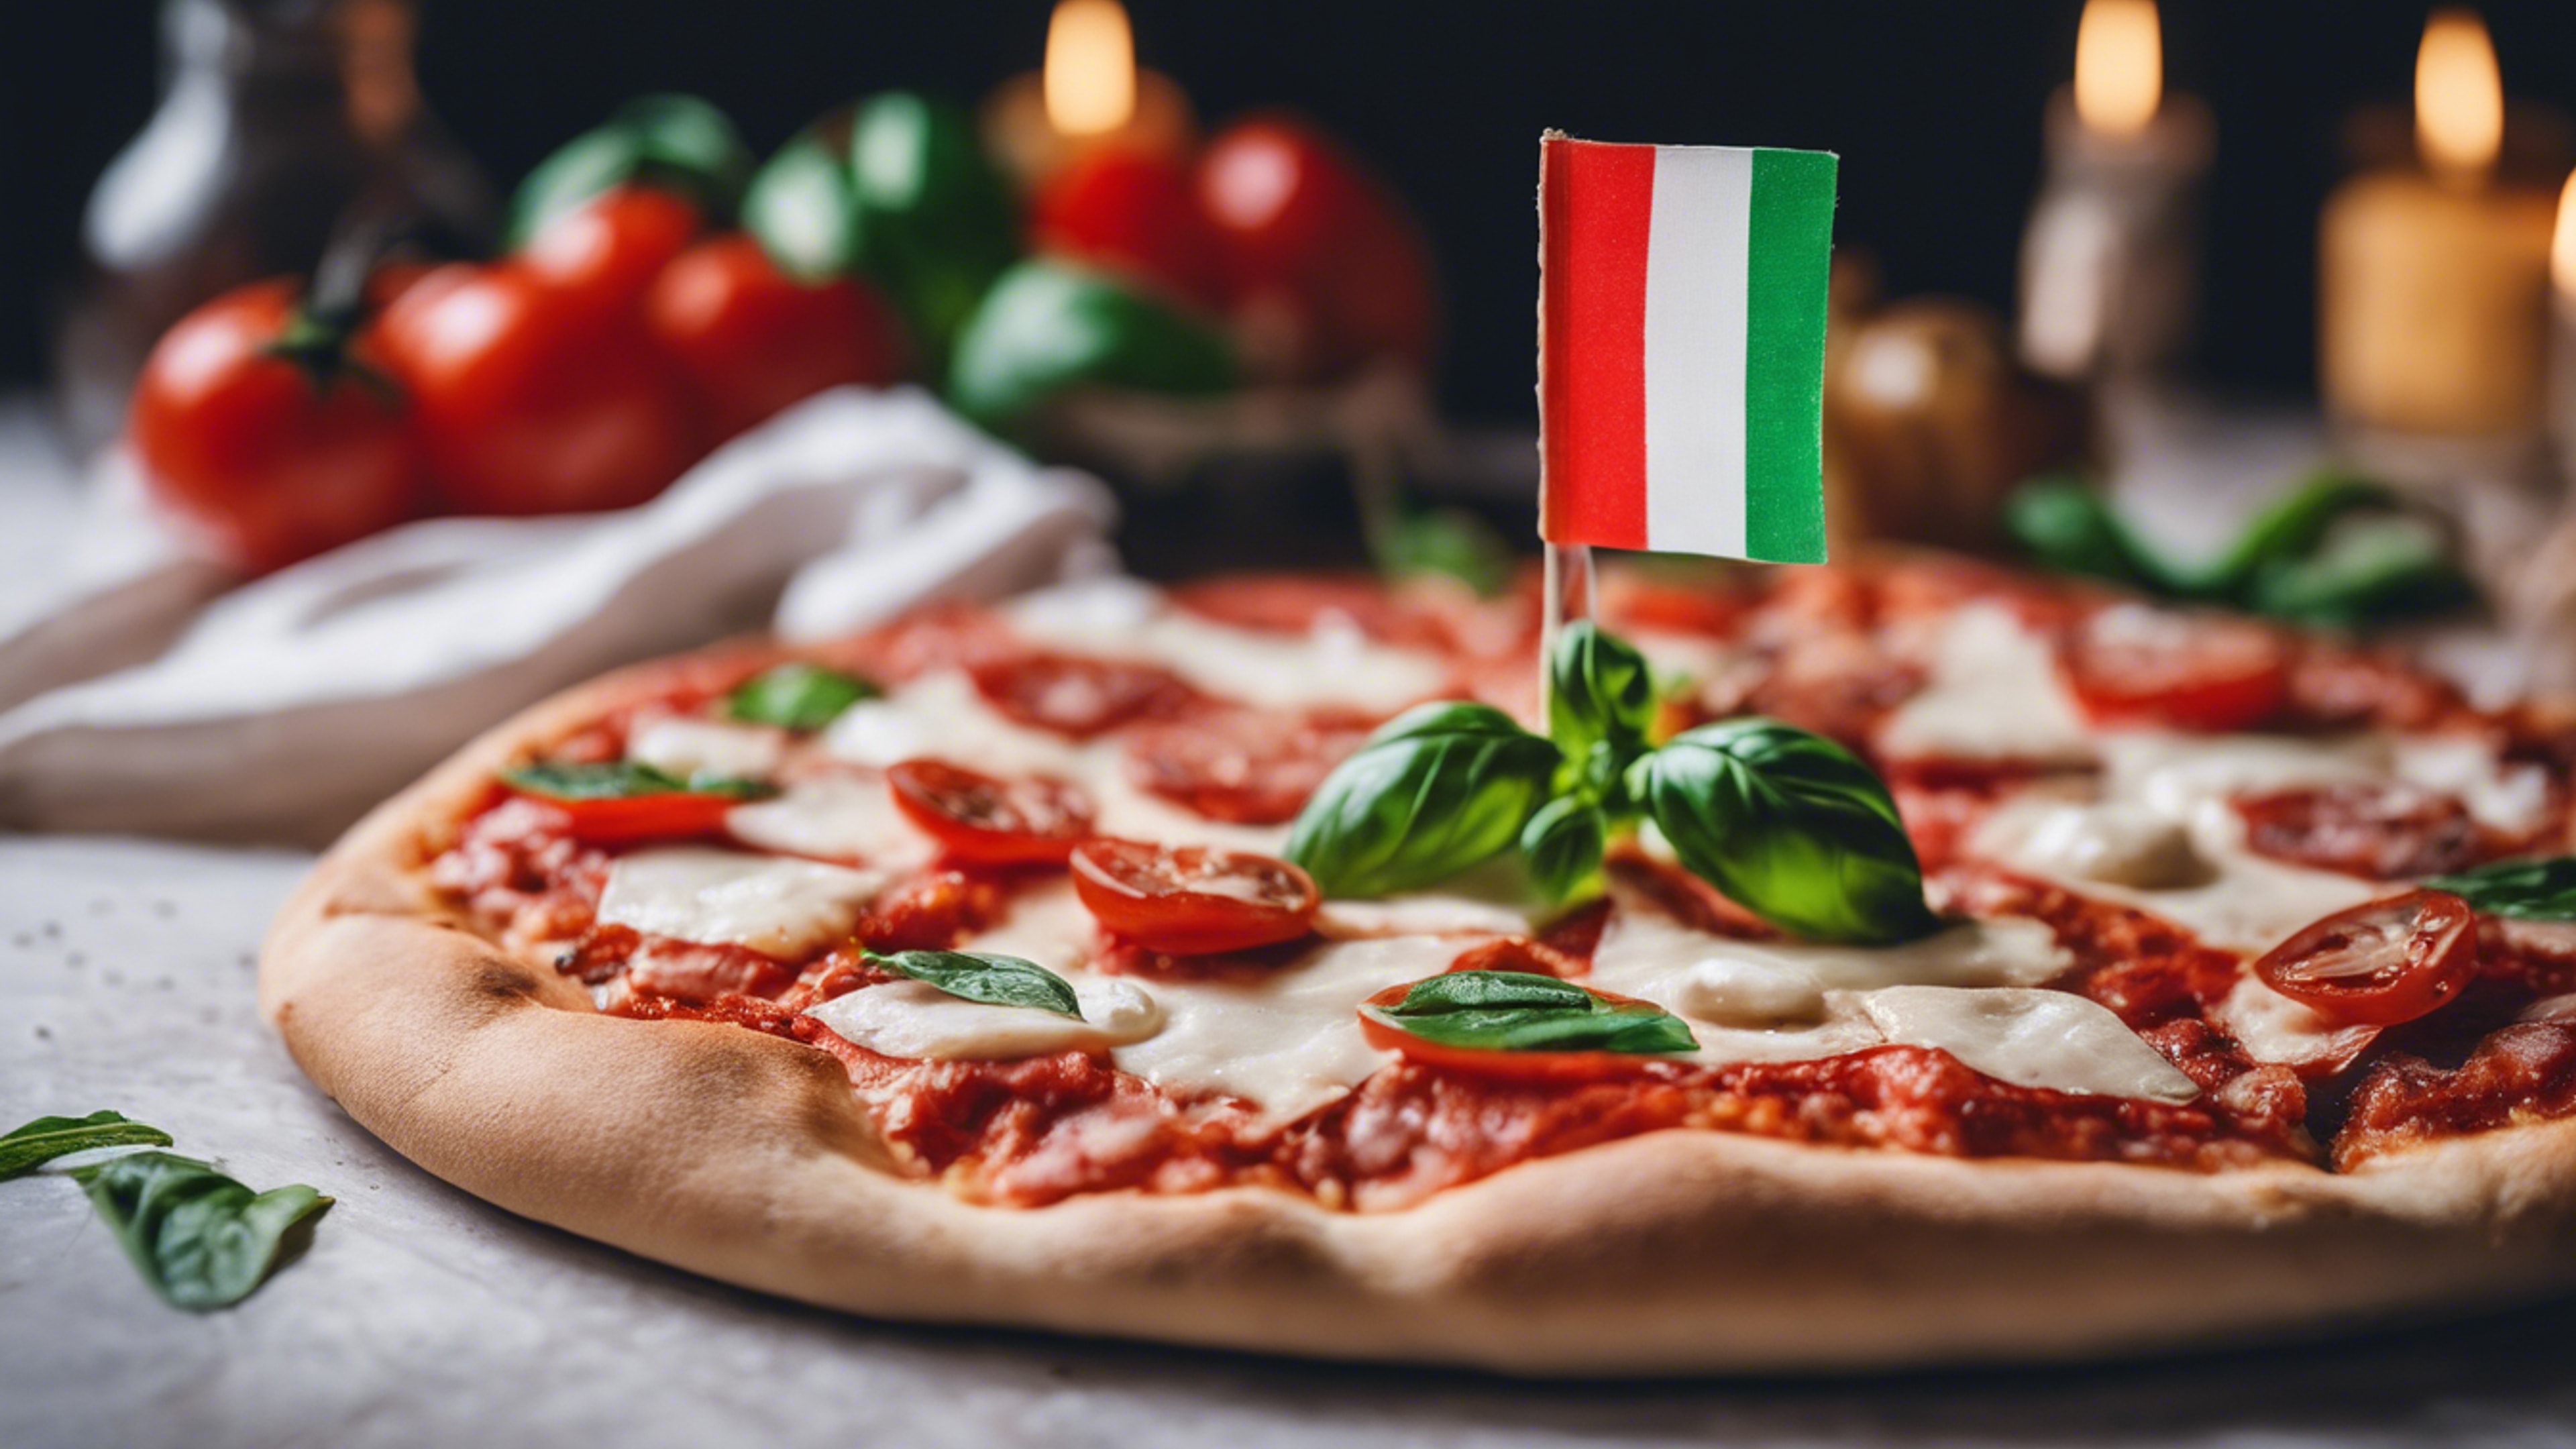 A delectable pizza margherita adorned with the vibrant colors of the Italian flag – green basil, white mozzarella, and red tomatoes. Behang[8d7c128777db467783aa]